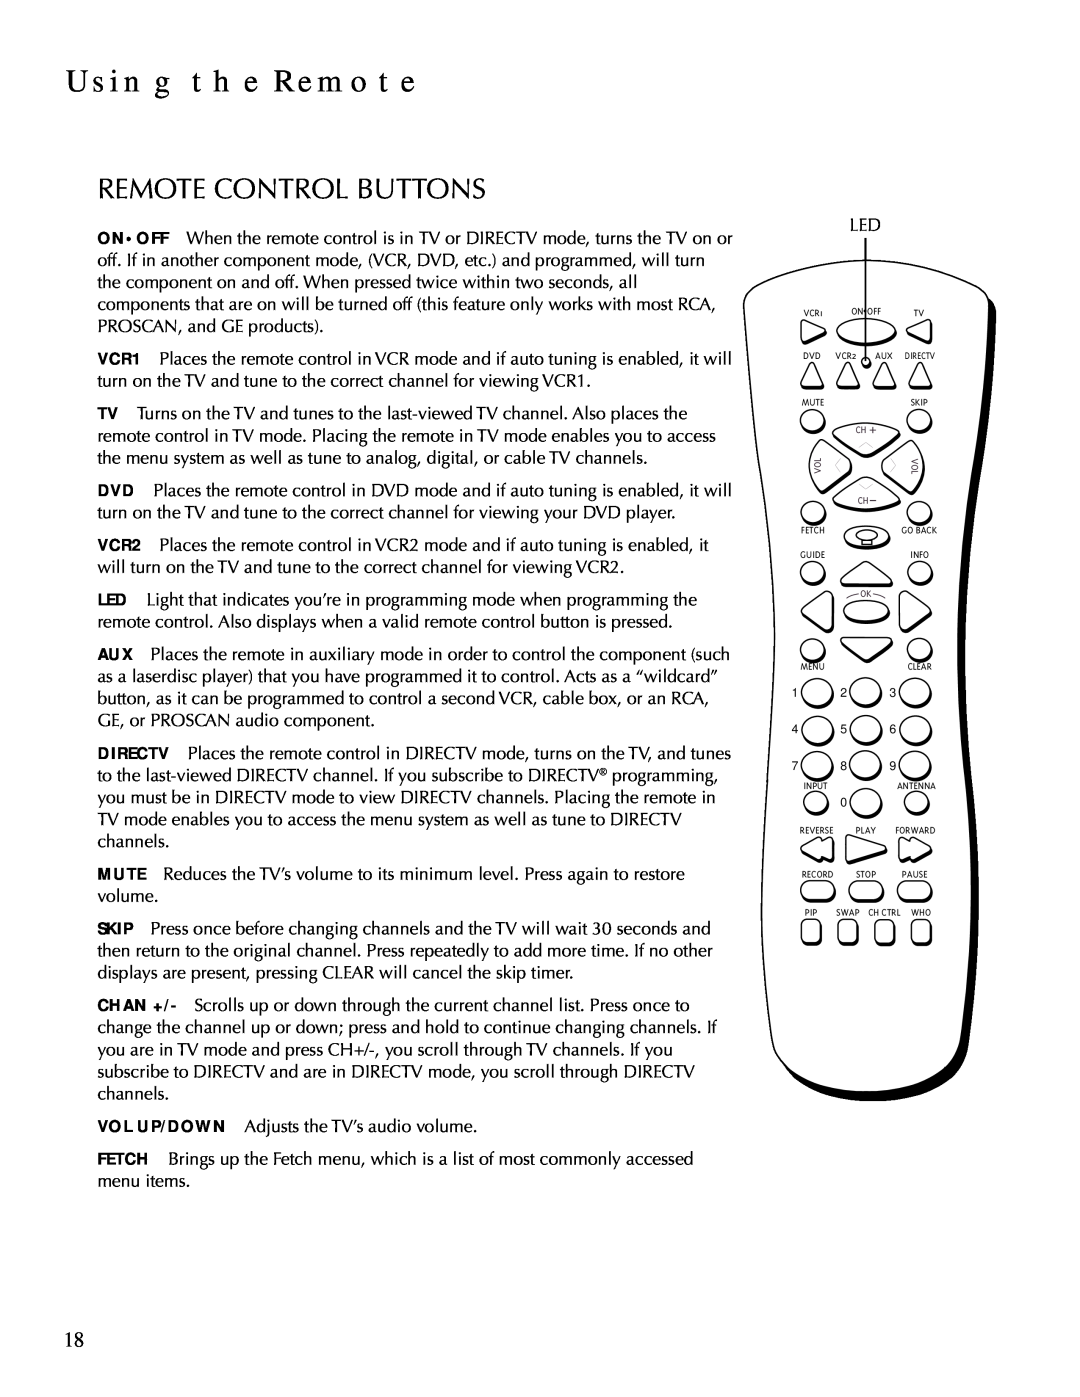 DirecTV HDTV user manual Using The Remote, Remote Control Buttons 